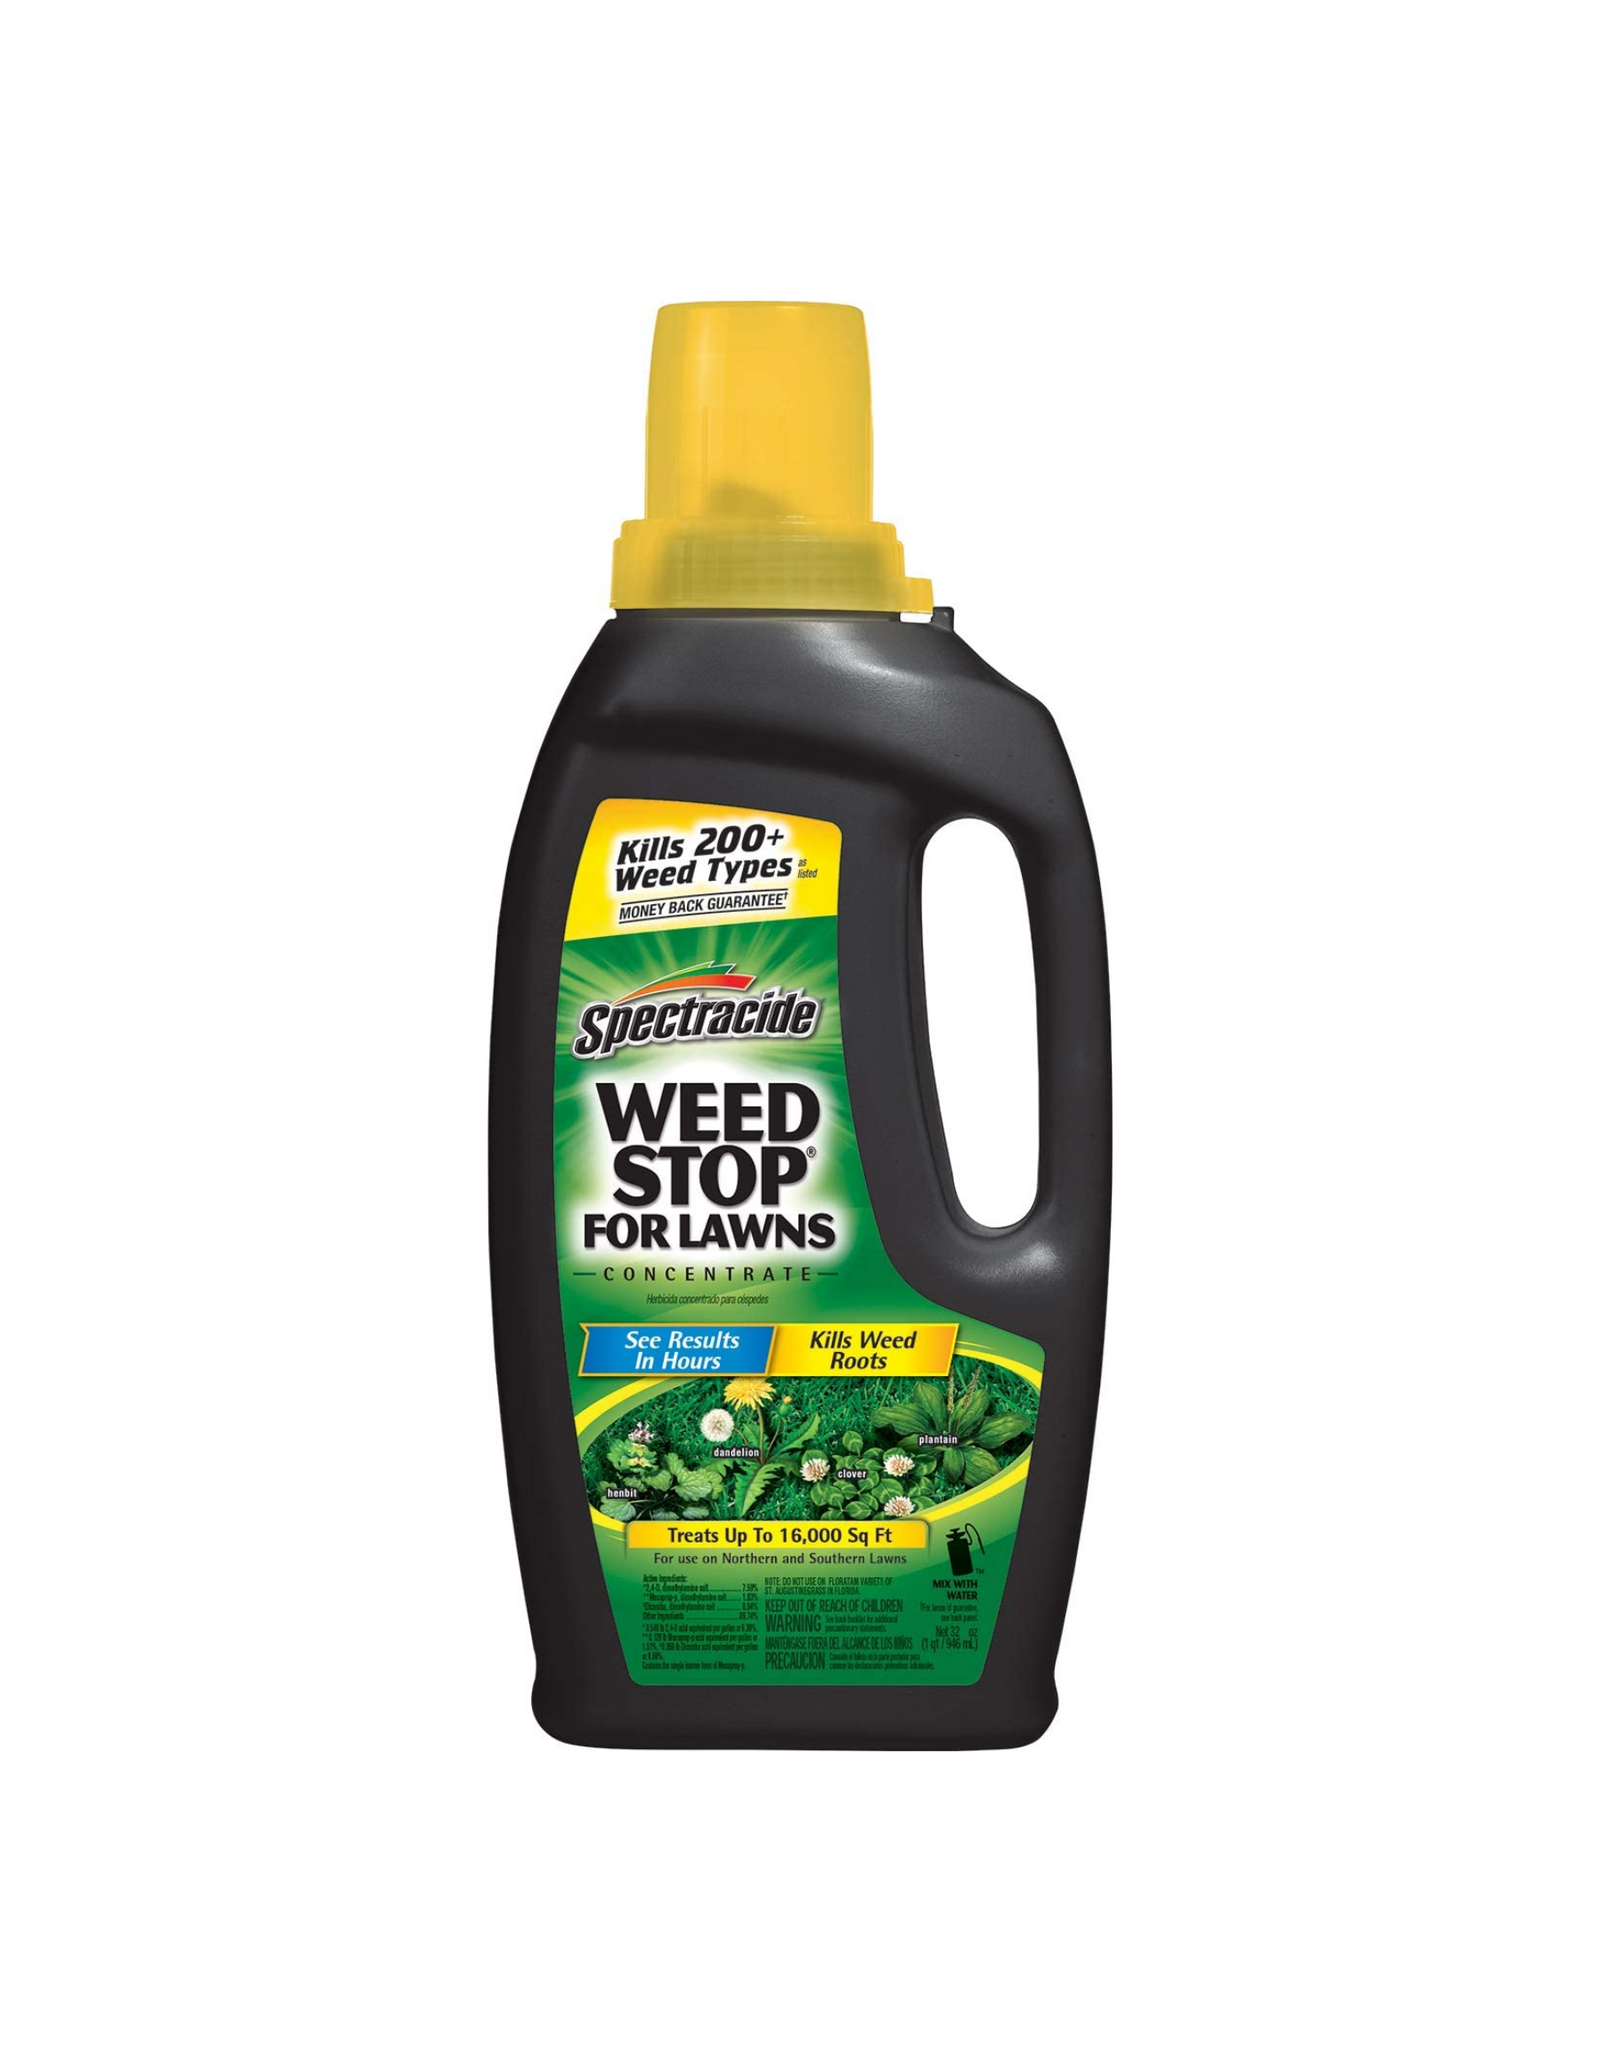 Spectracide Weed Stop For Lawns Concentrate 32 fl oz - Treats Up to 16,000 Sq Ft